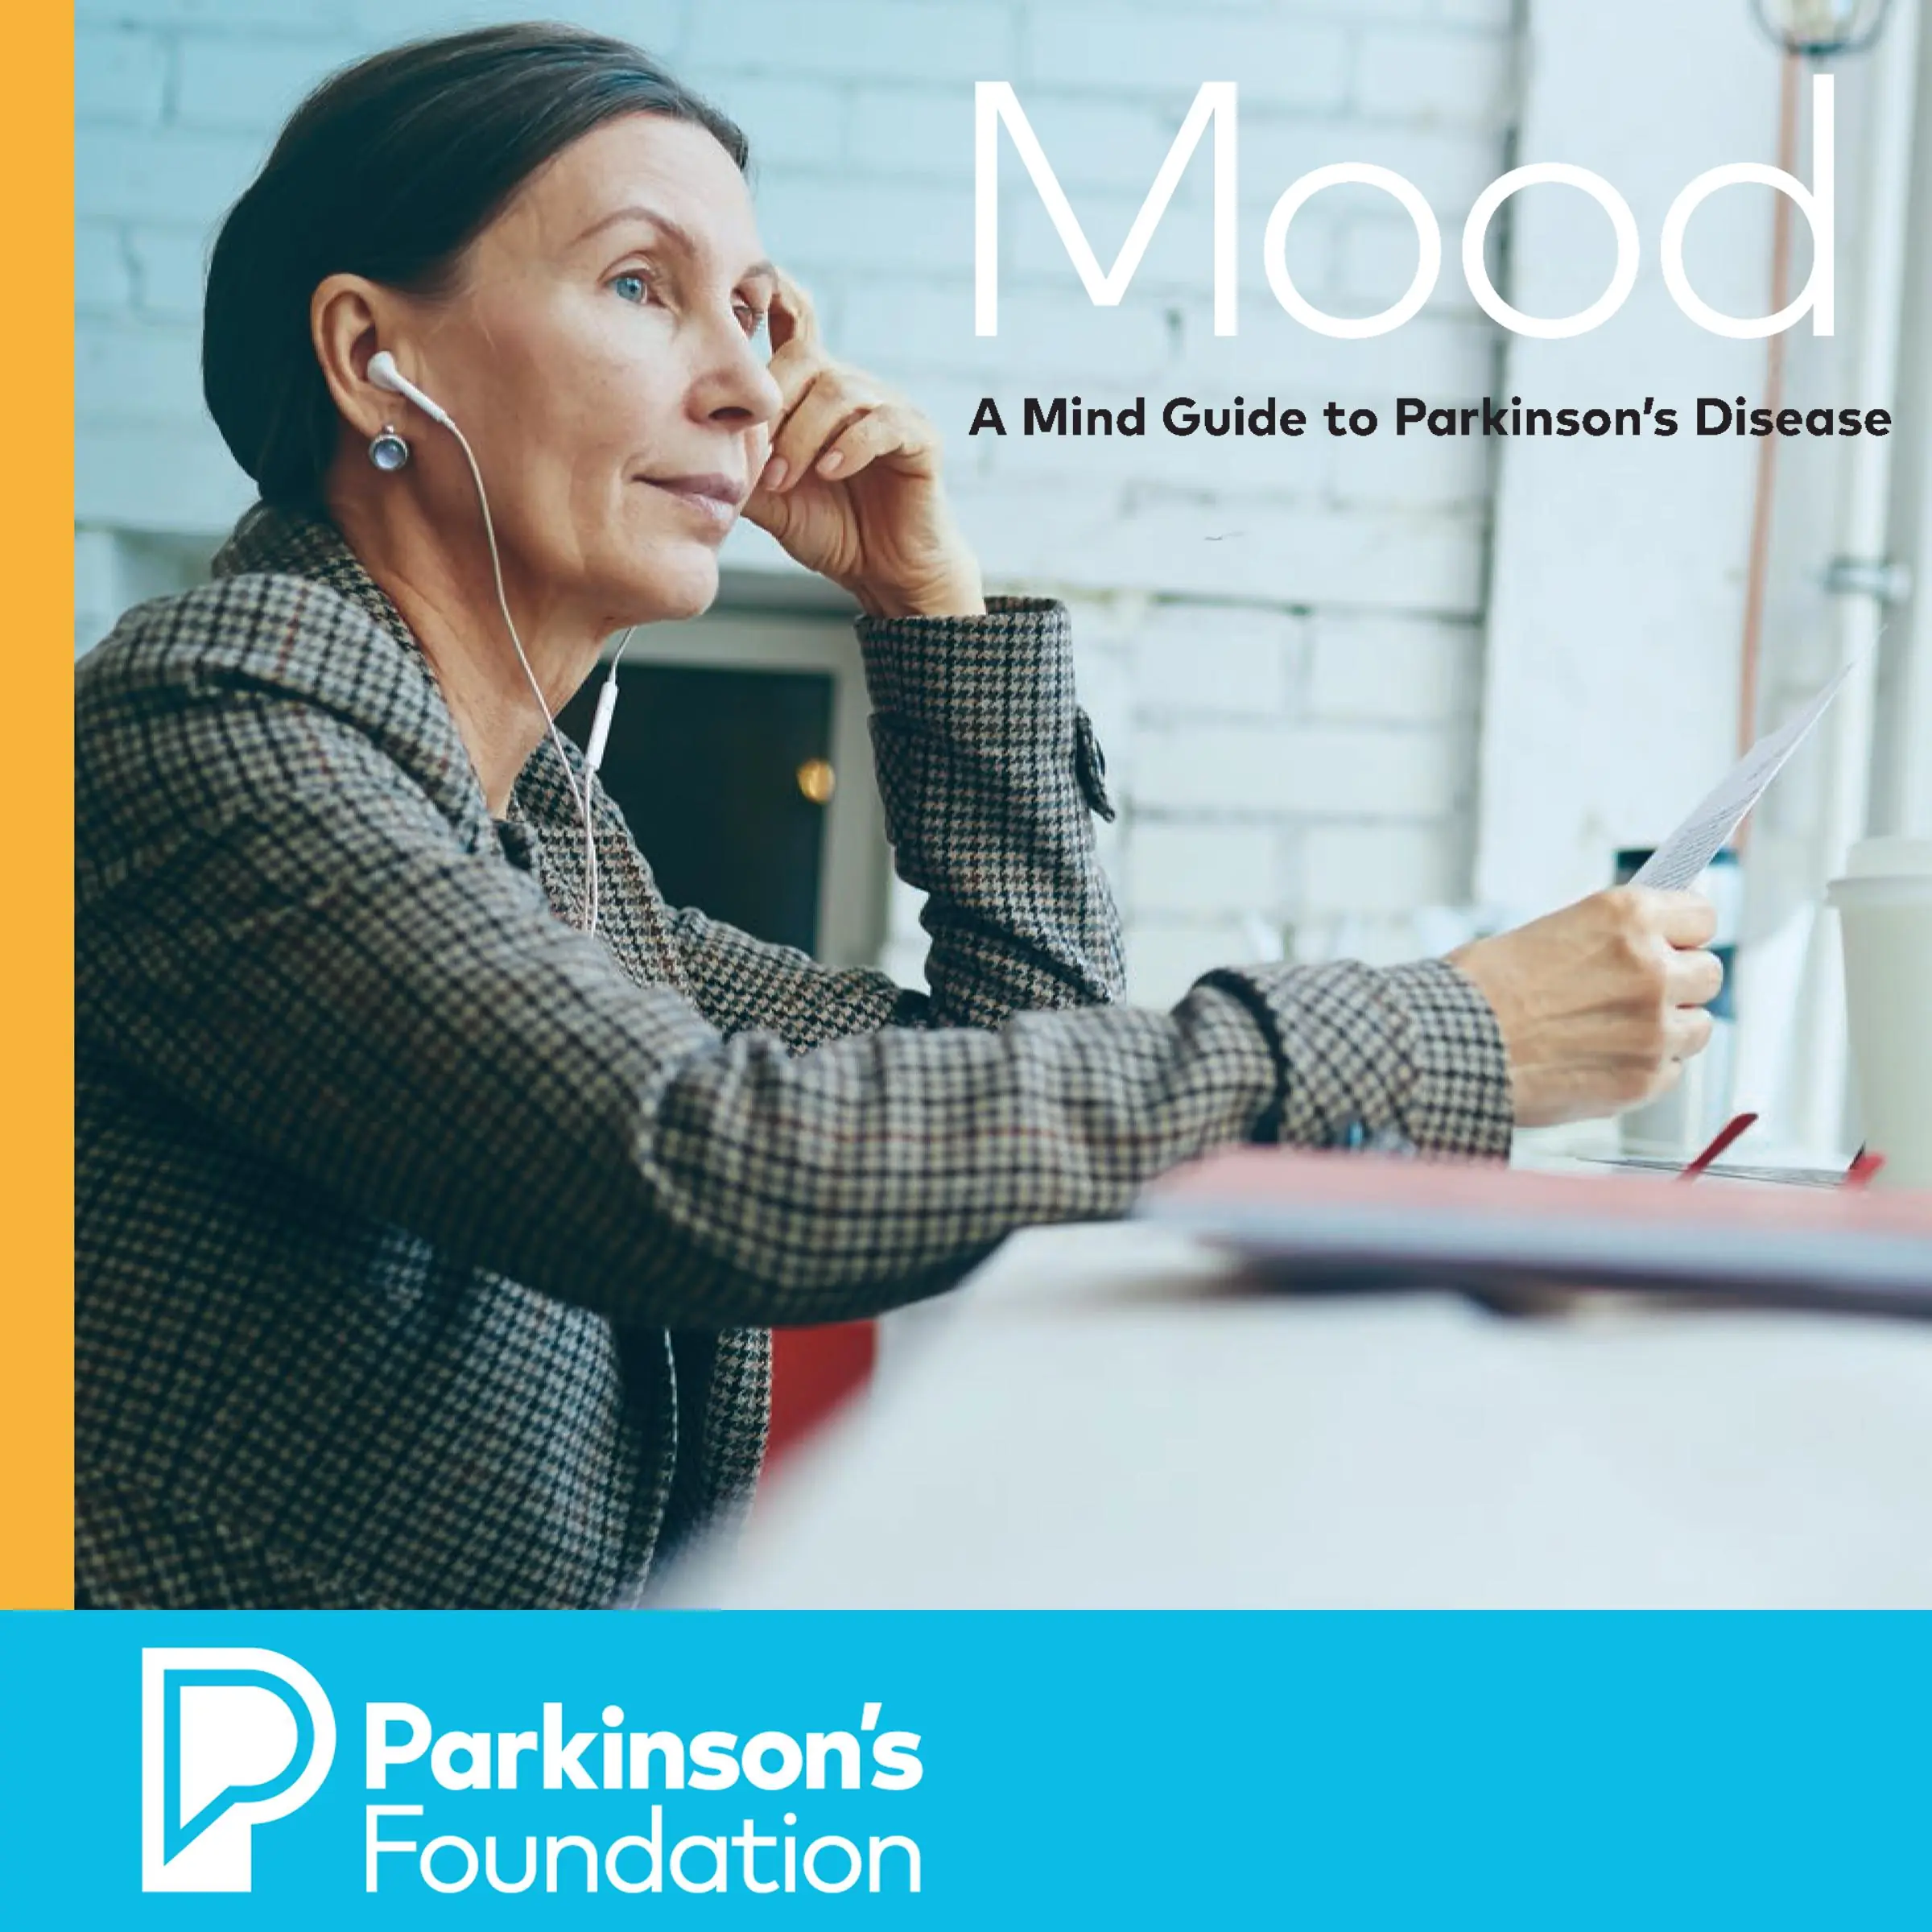 Mood: A Mind Guide to Parkinson's Disease Audiobook by Parkinsons Foundation